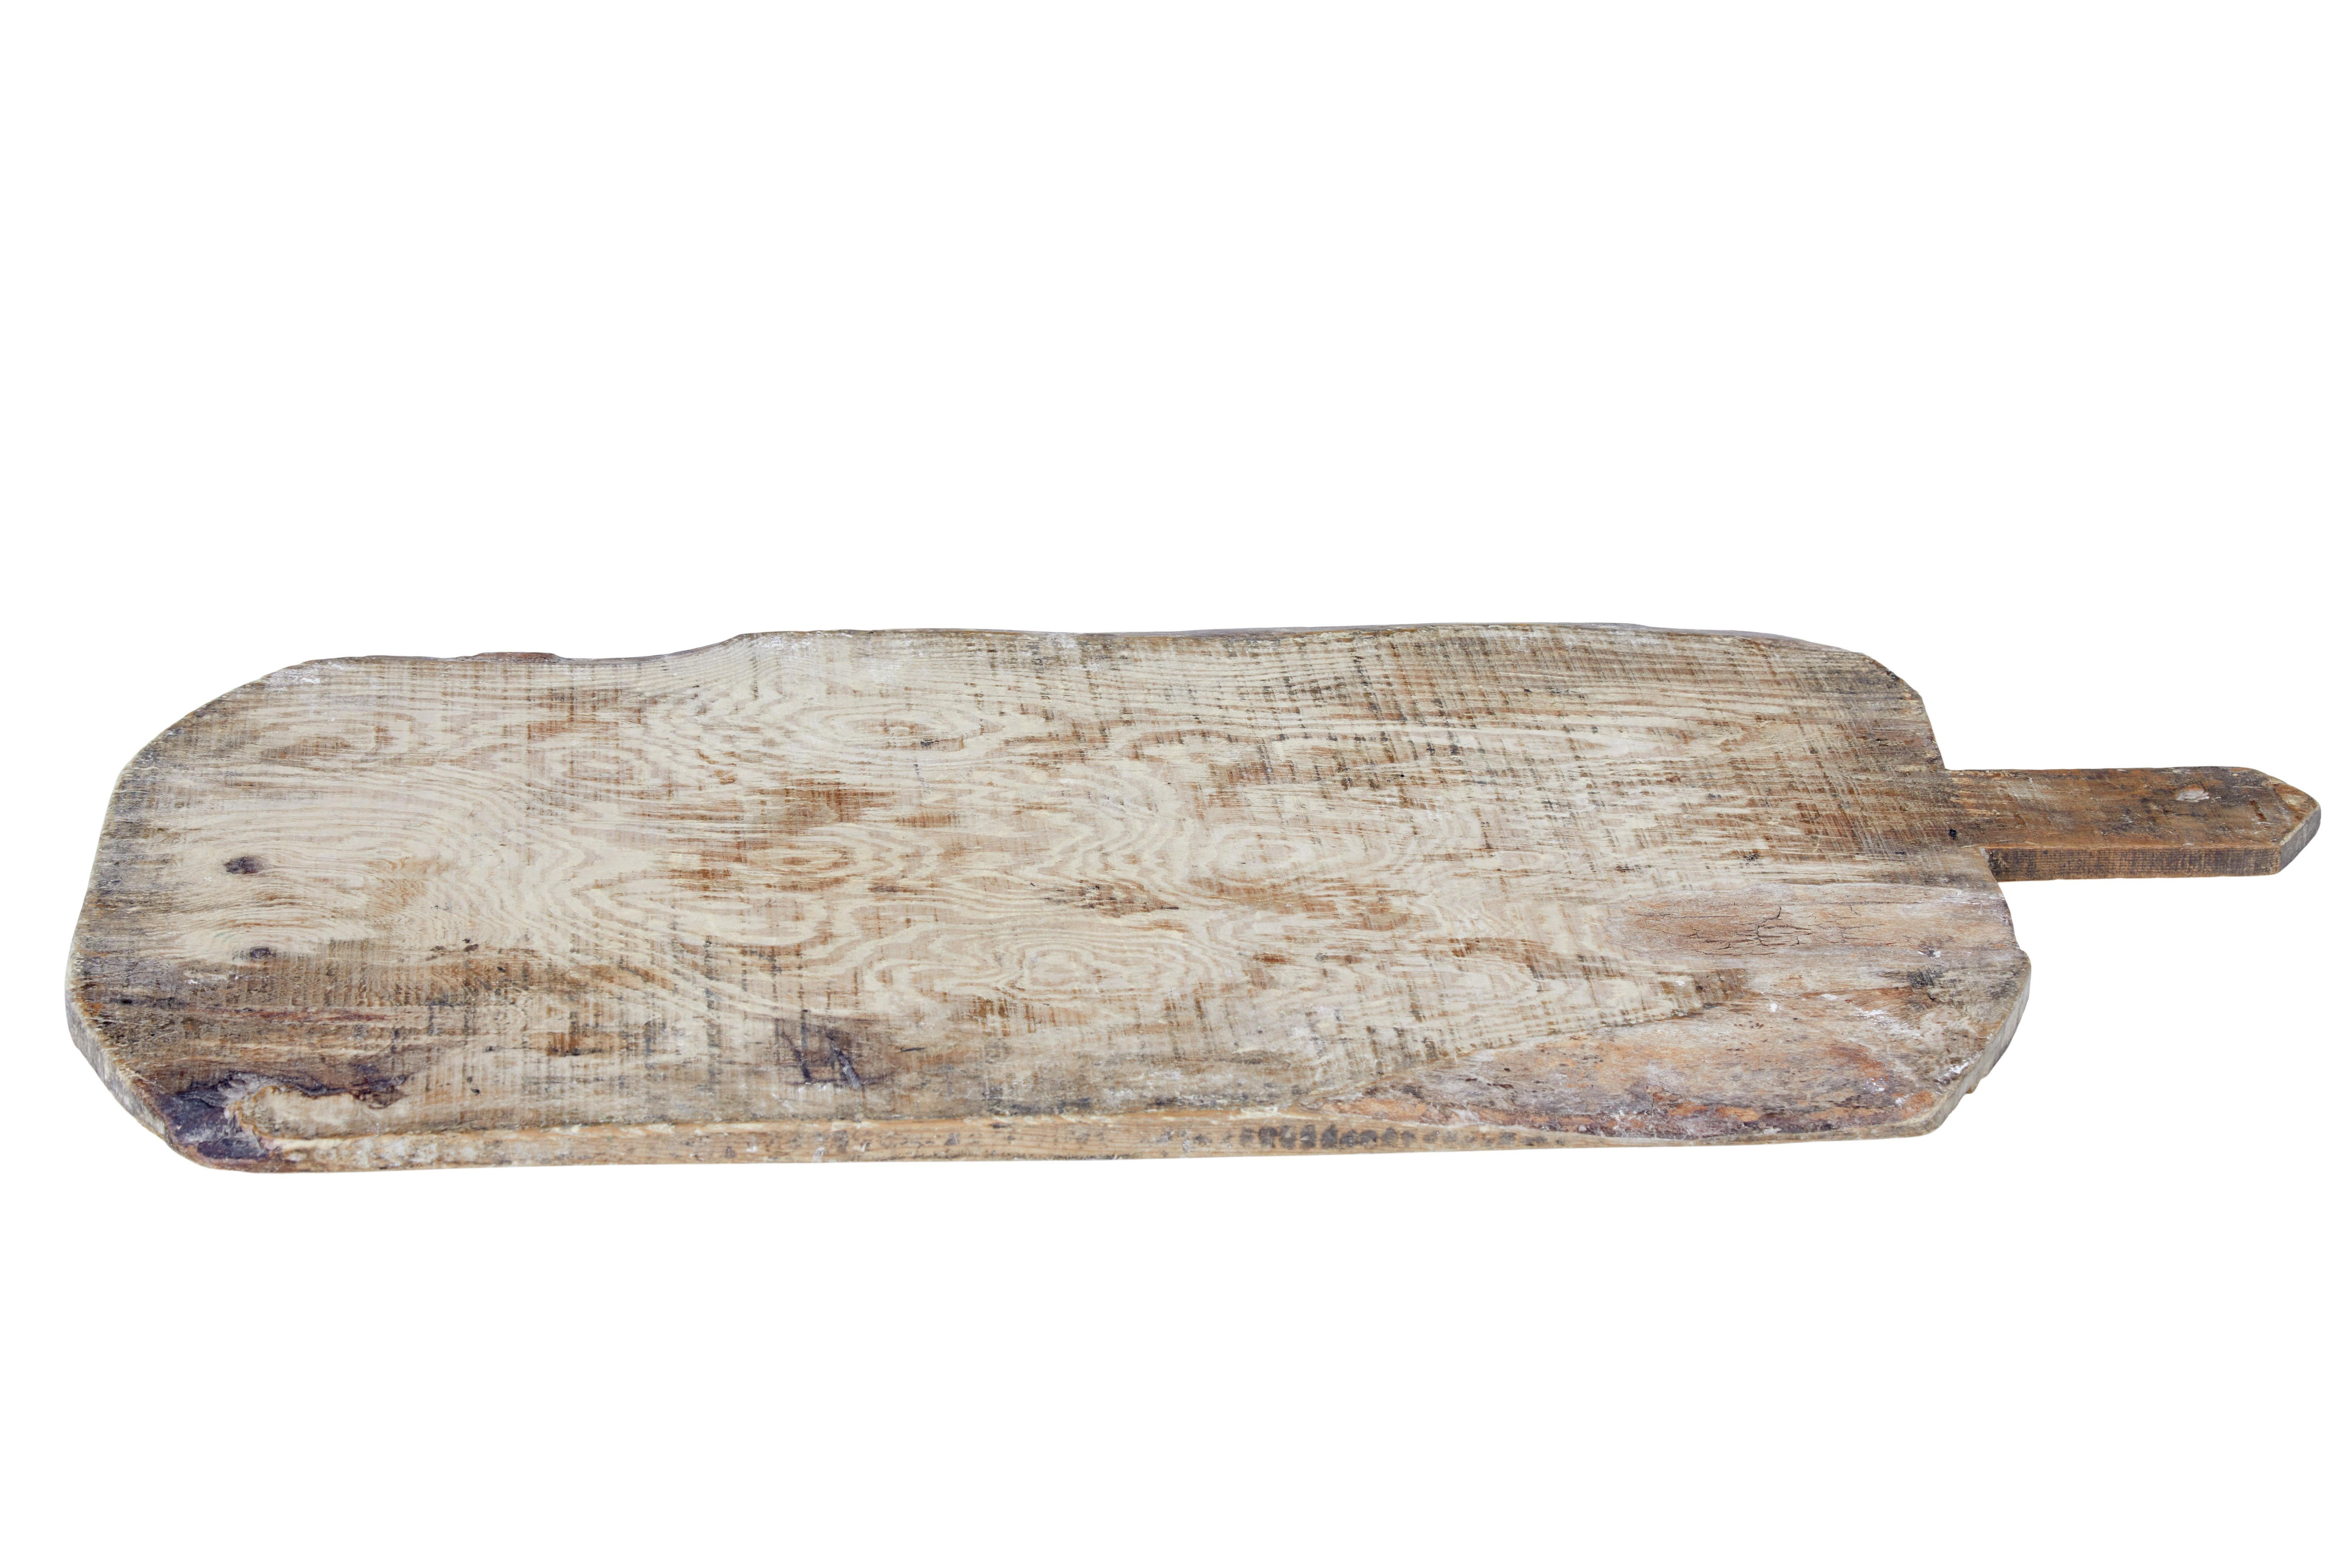 19th century rustic Scandinavian bread board circa 1890.

Rustic piece of Swedish kitchen ware. Made from 1 solid piece of pine including the handle. Handle has a hole in it so it could be hung up.

Ideal decorative item, or for using as a